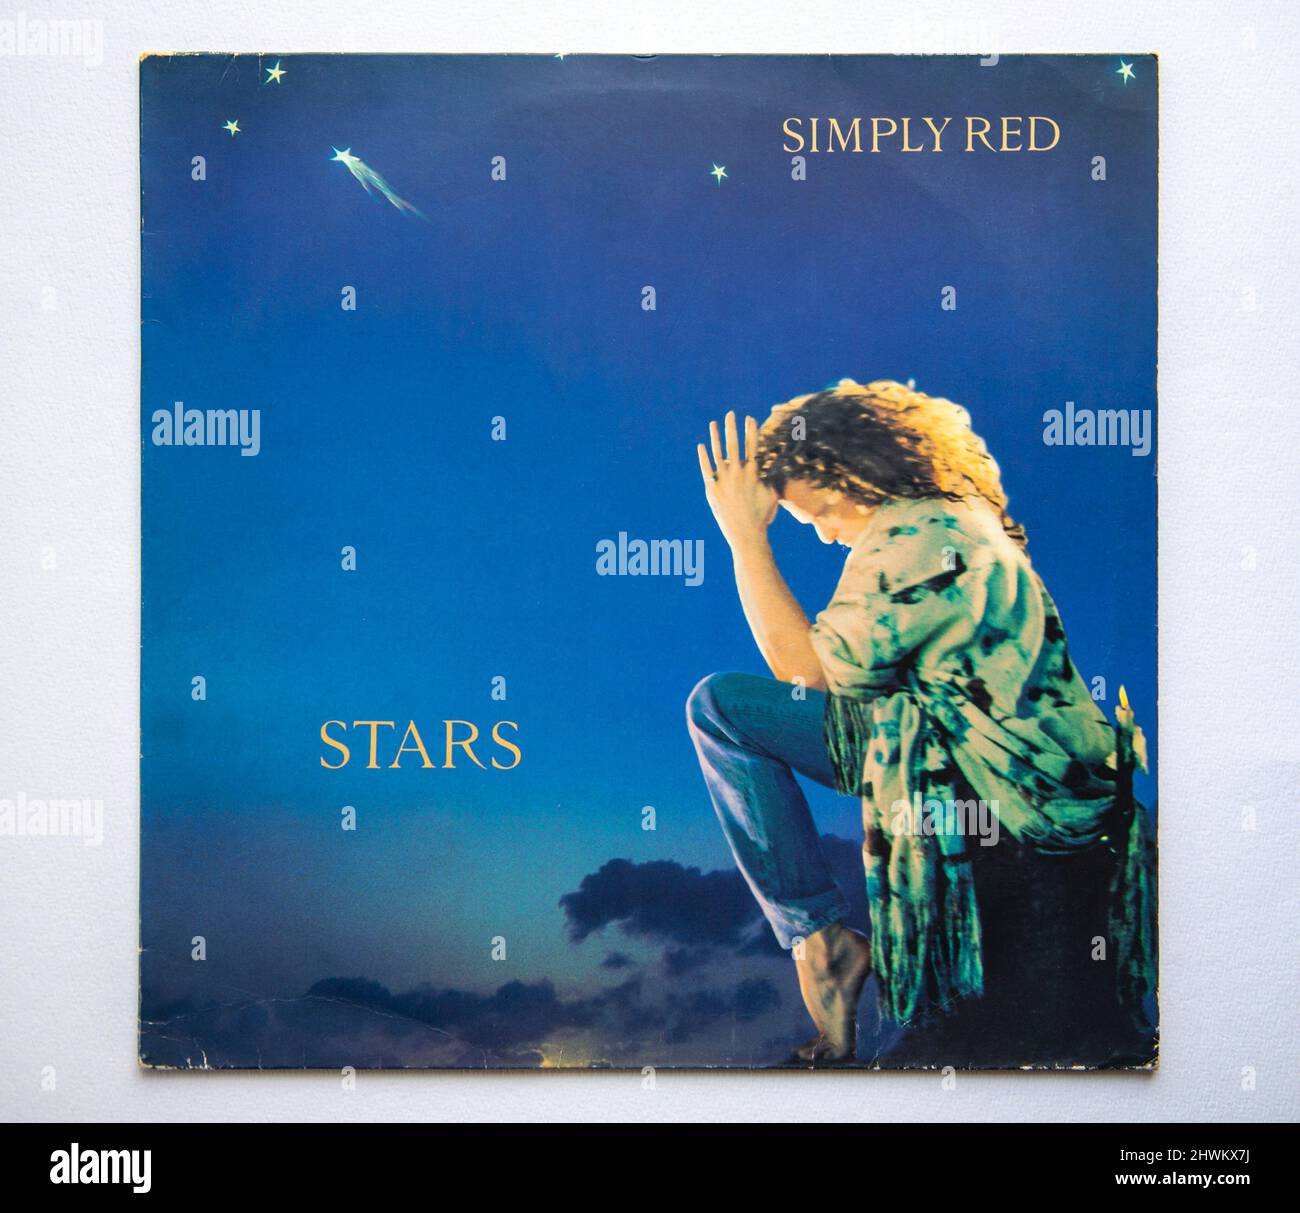 LP cover of Stars, the fourth studio album by Simply Red, which was released in 1991 Stock Photo